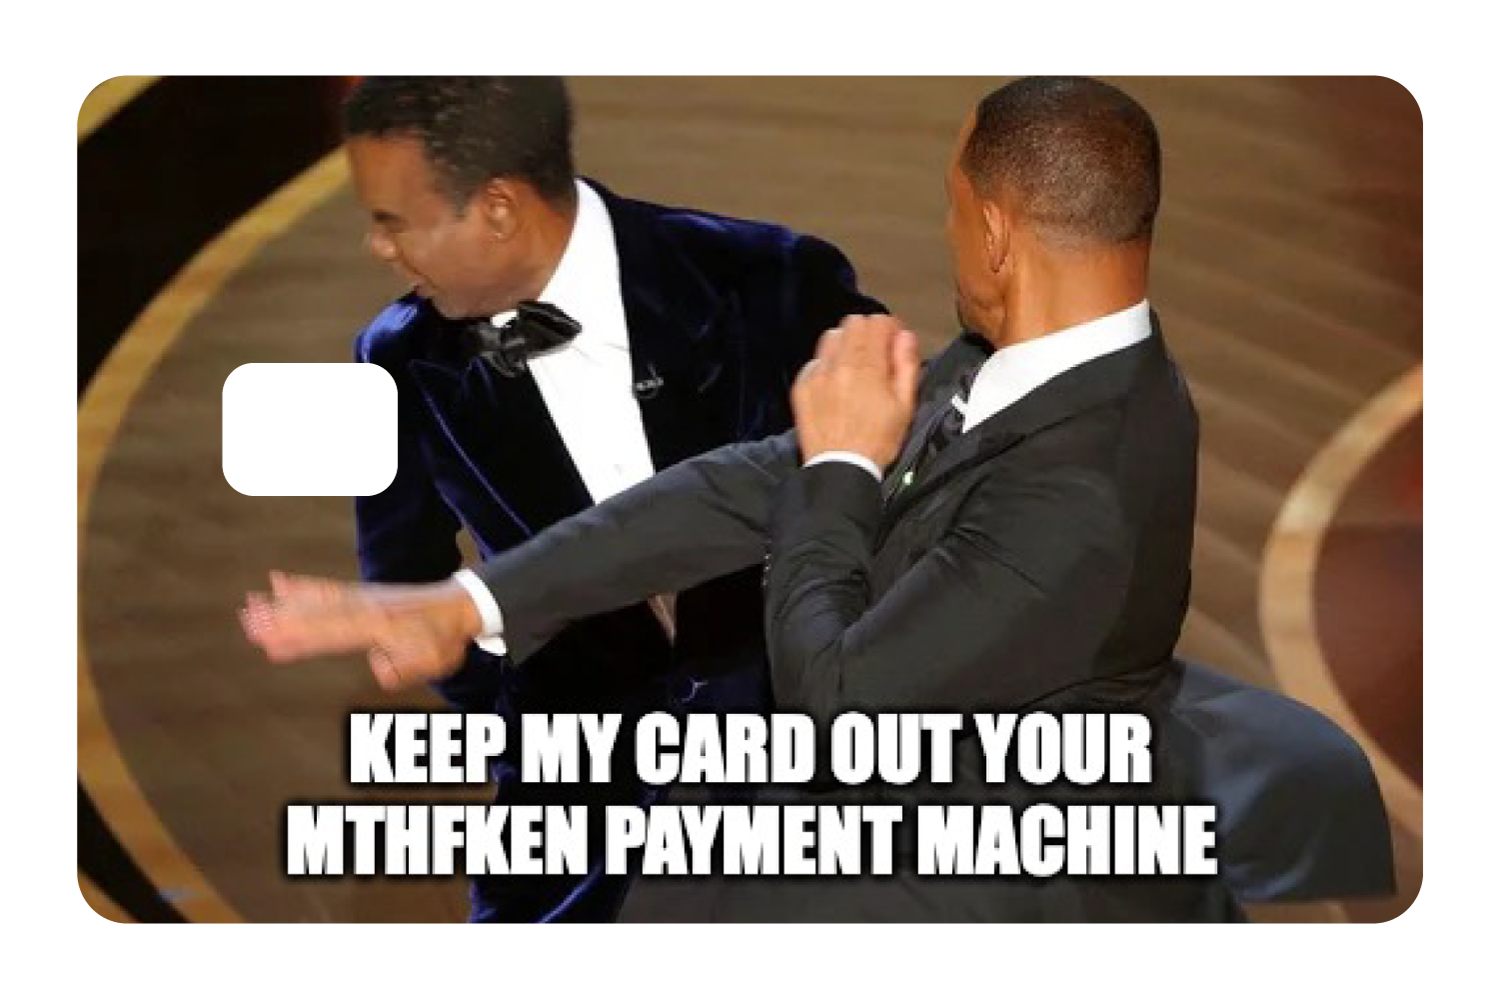 Keep my card out